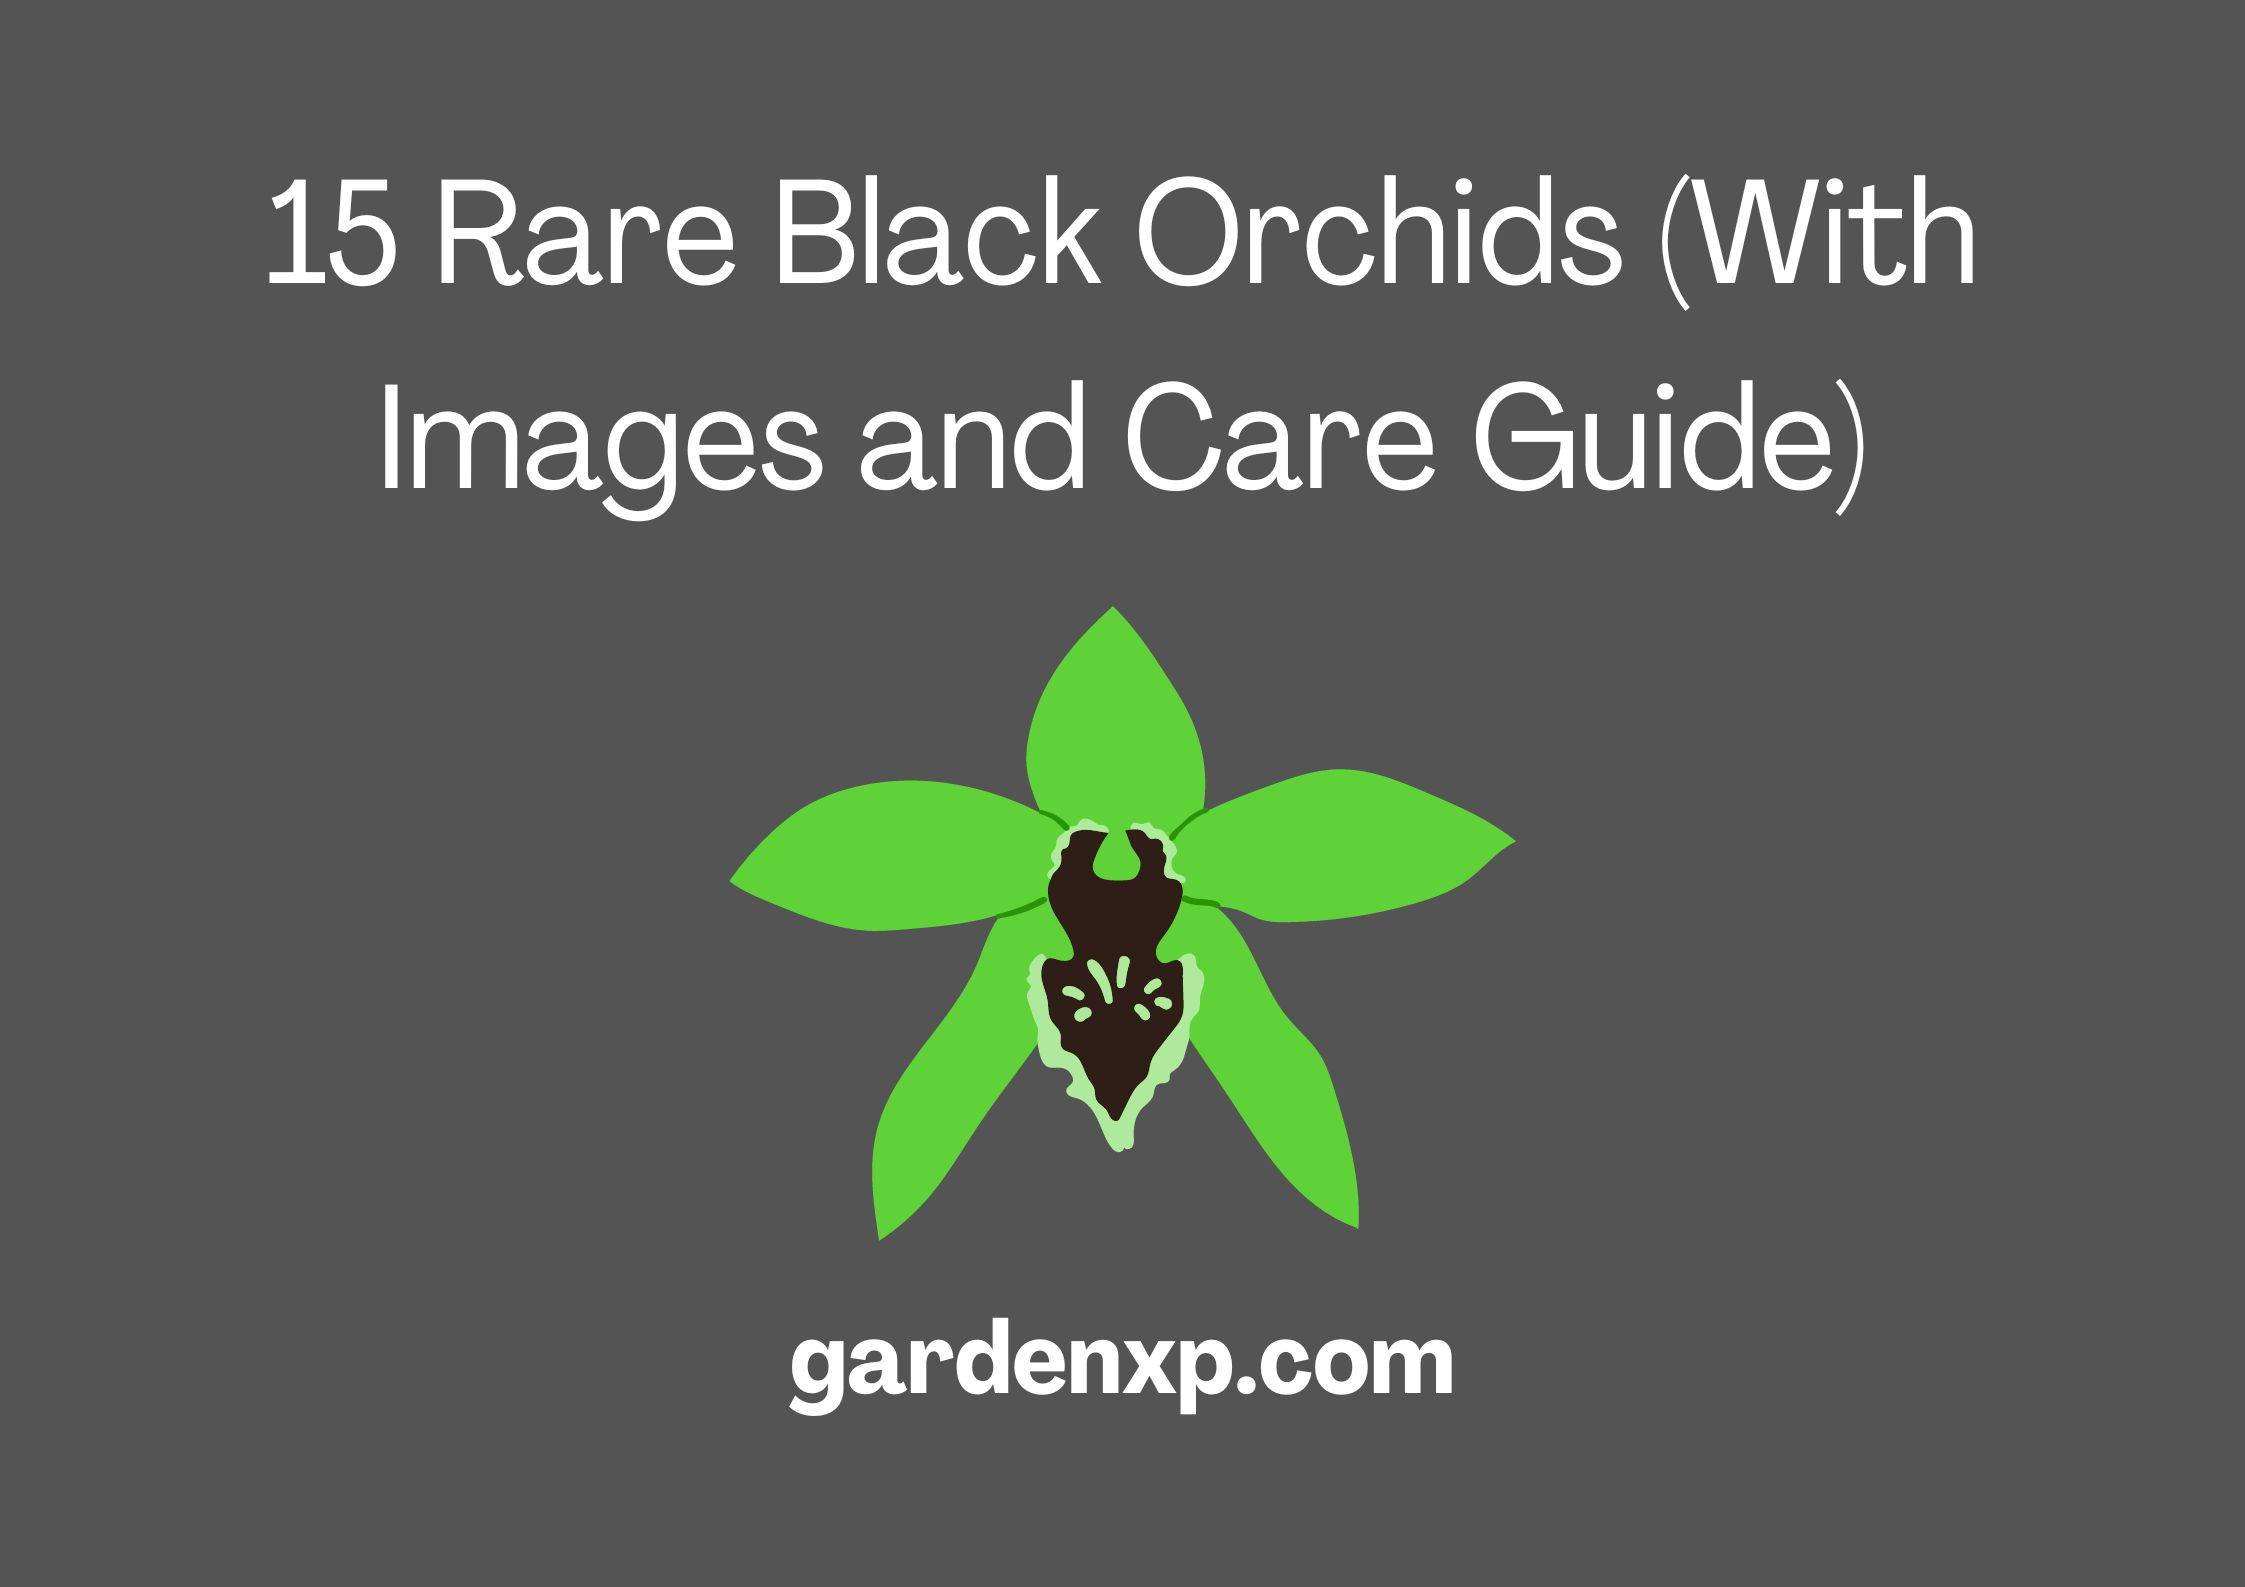 15 Rare Black Orchids (With Images and Care Guide)